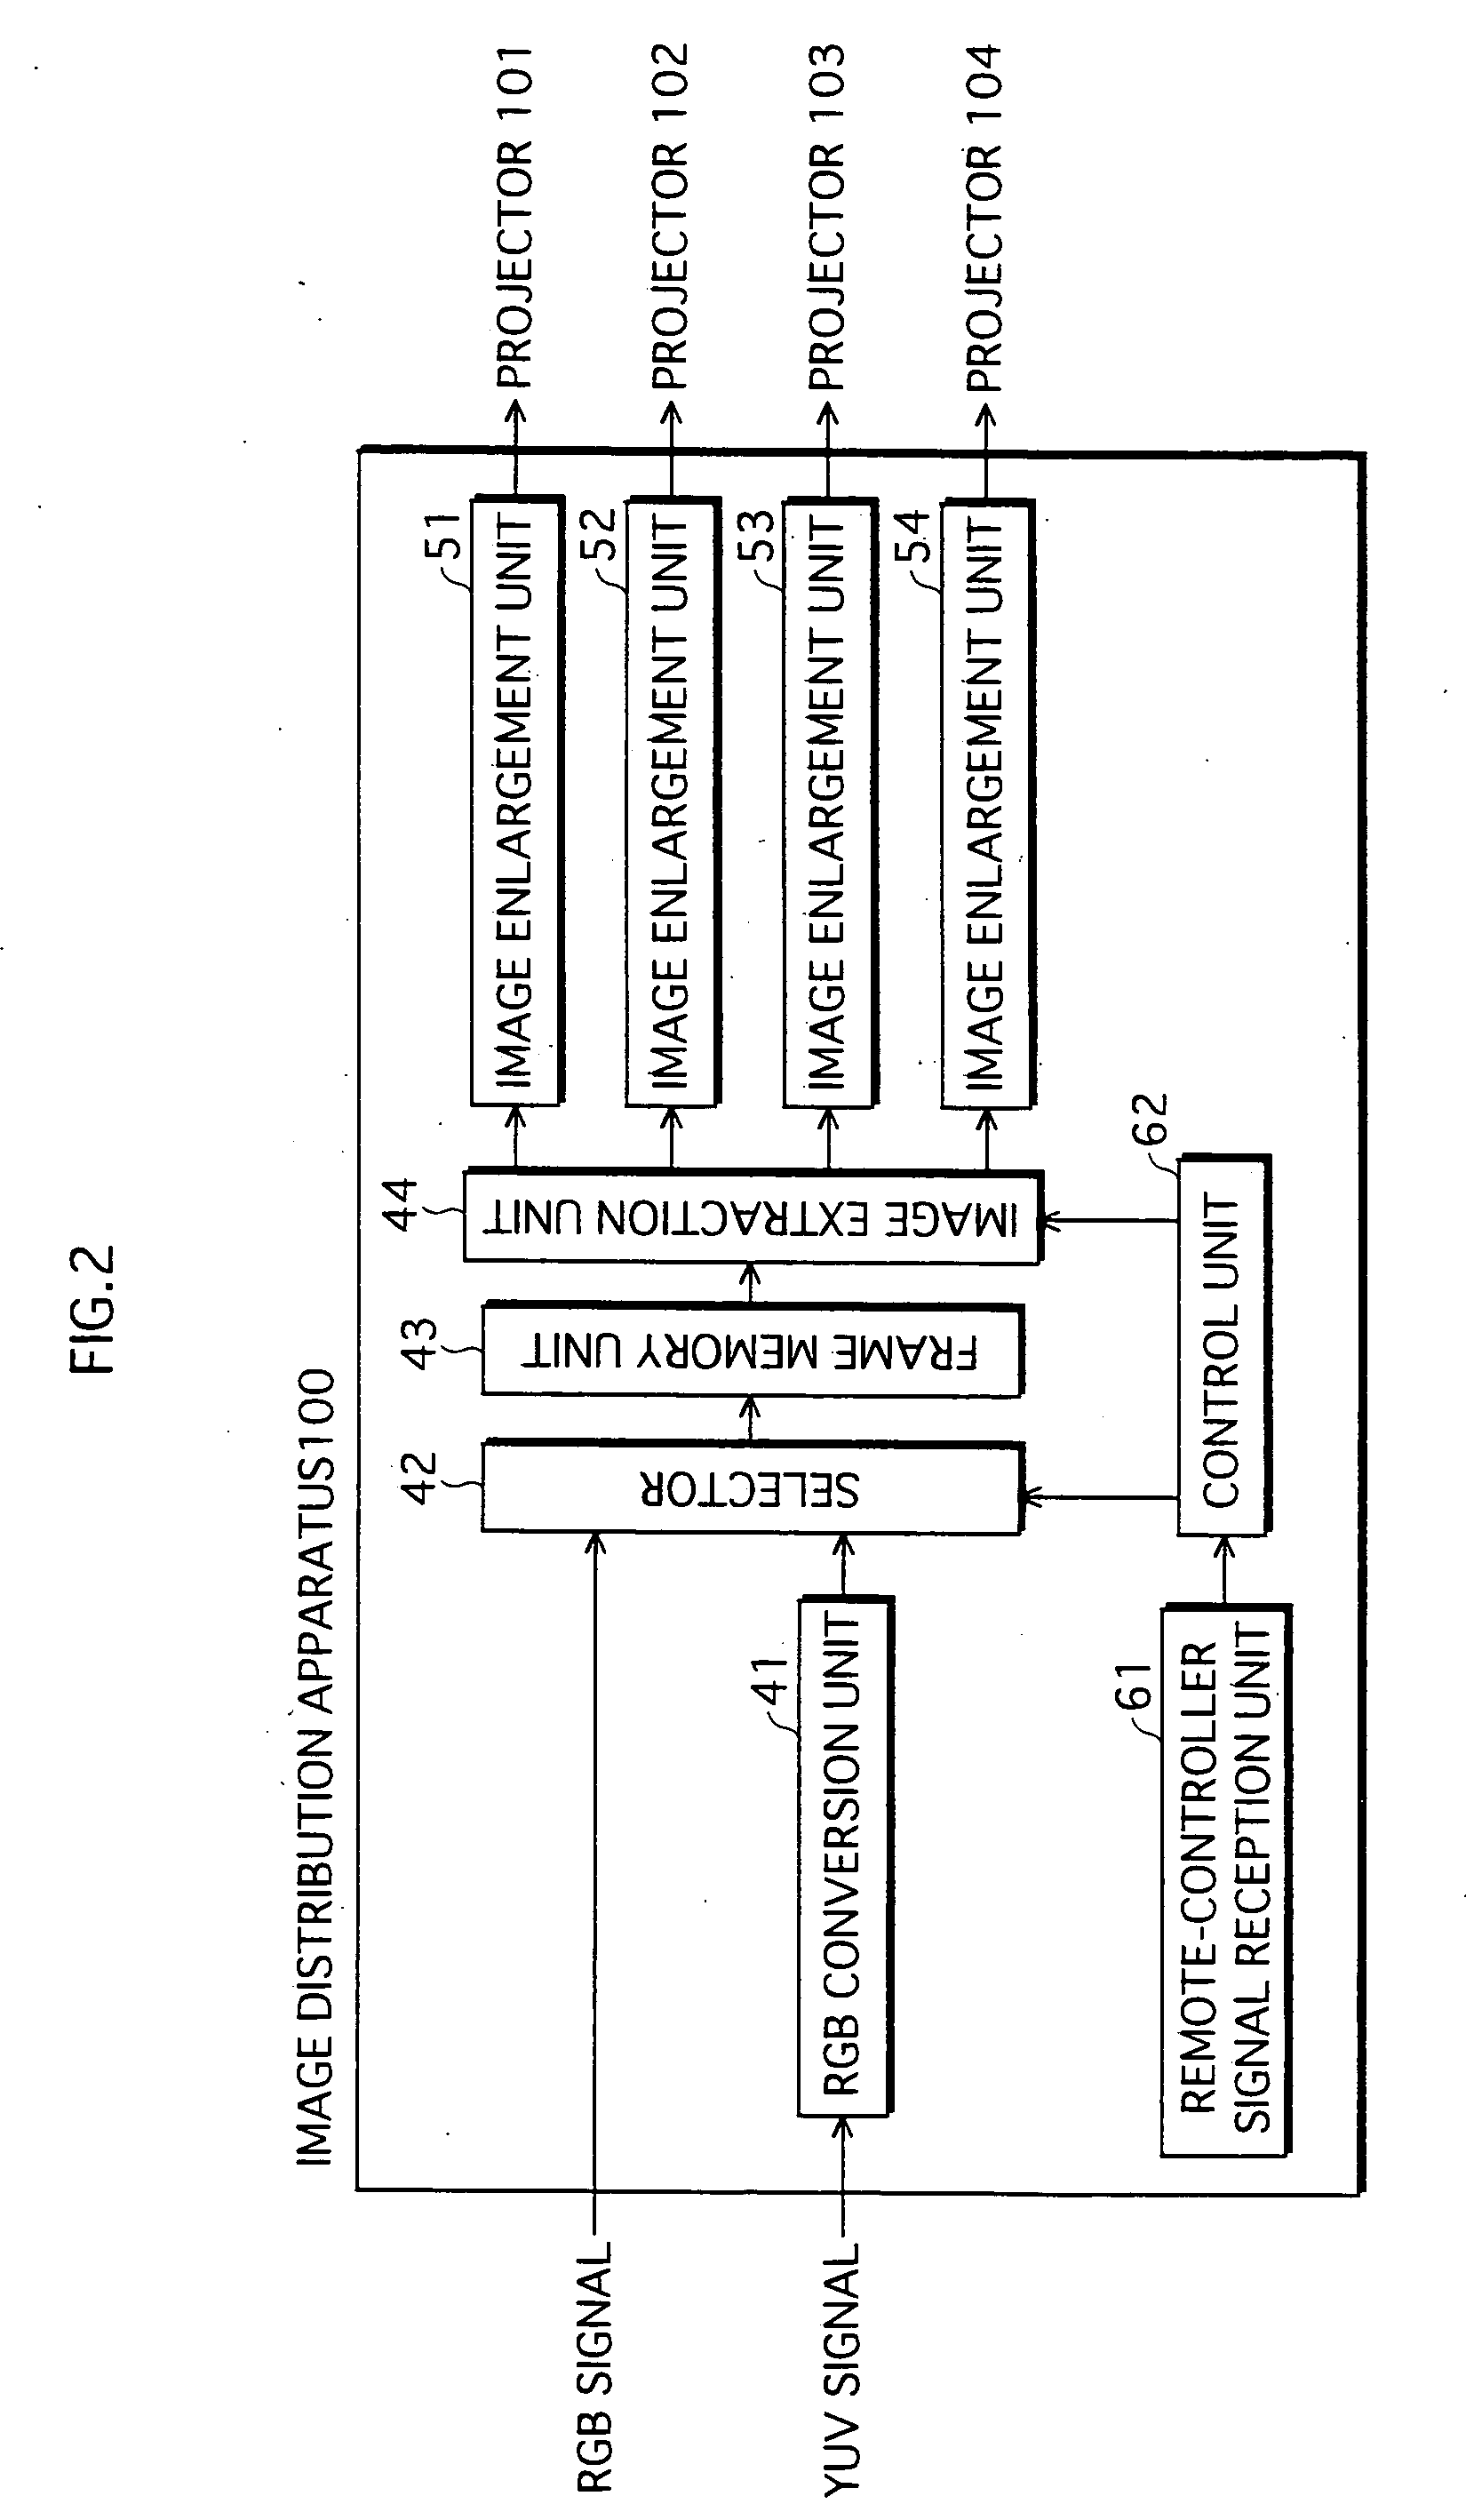 Image display devices, multi-display device, and luminance management device